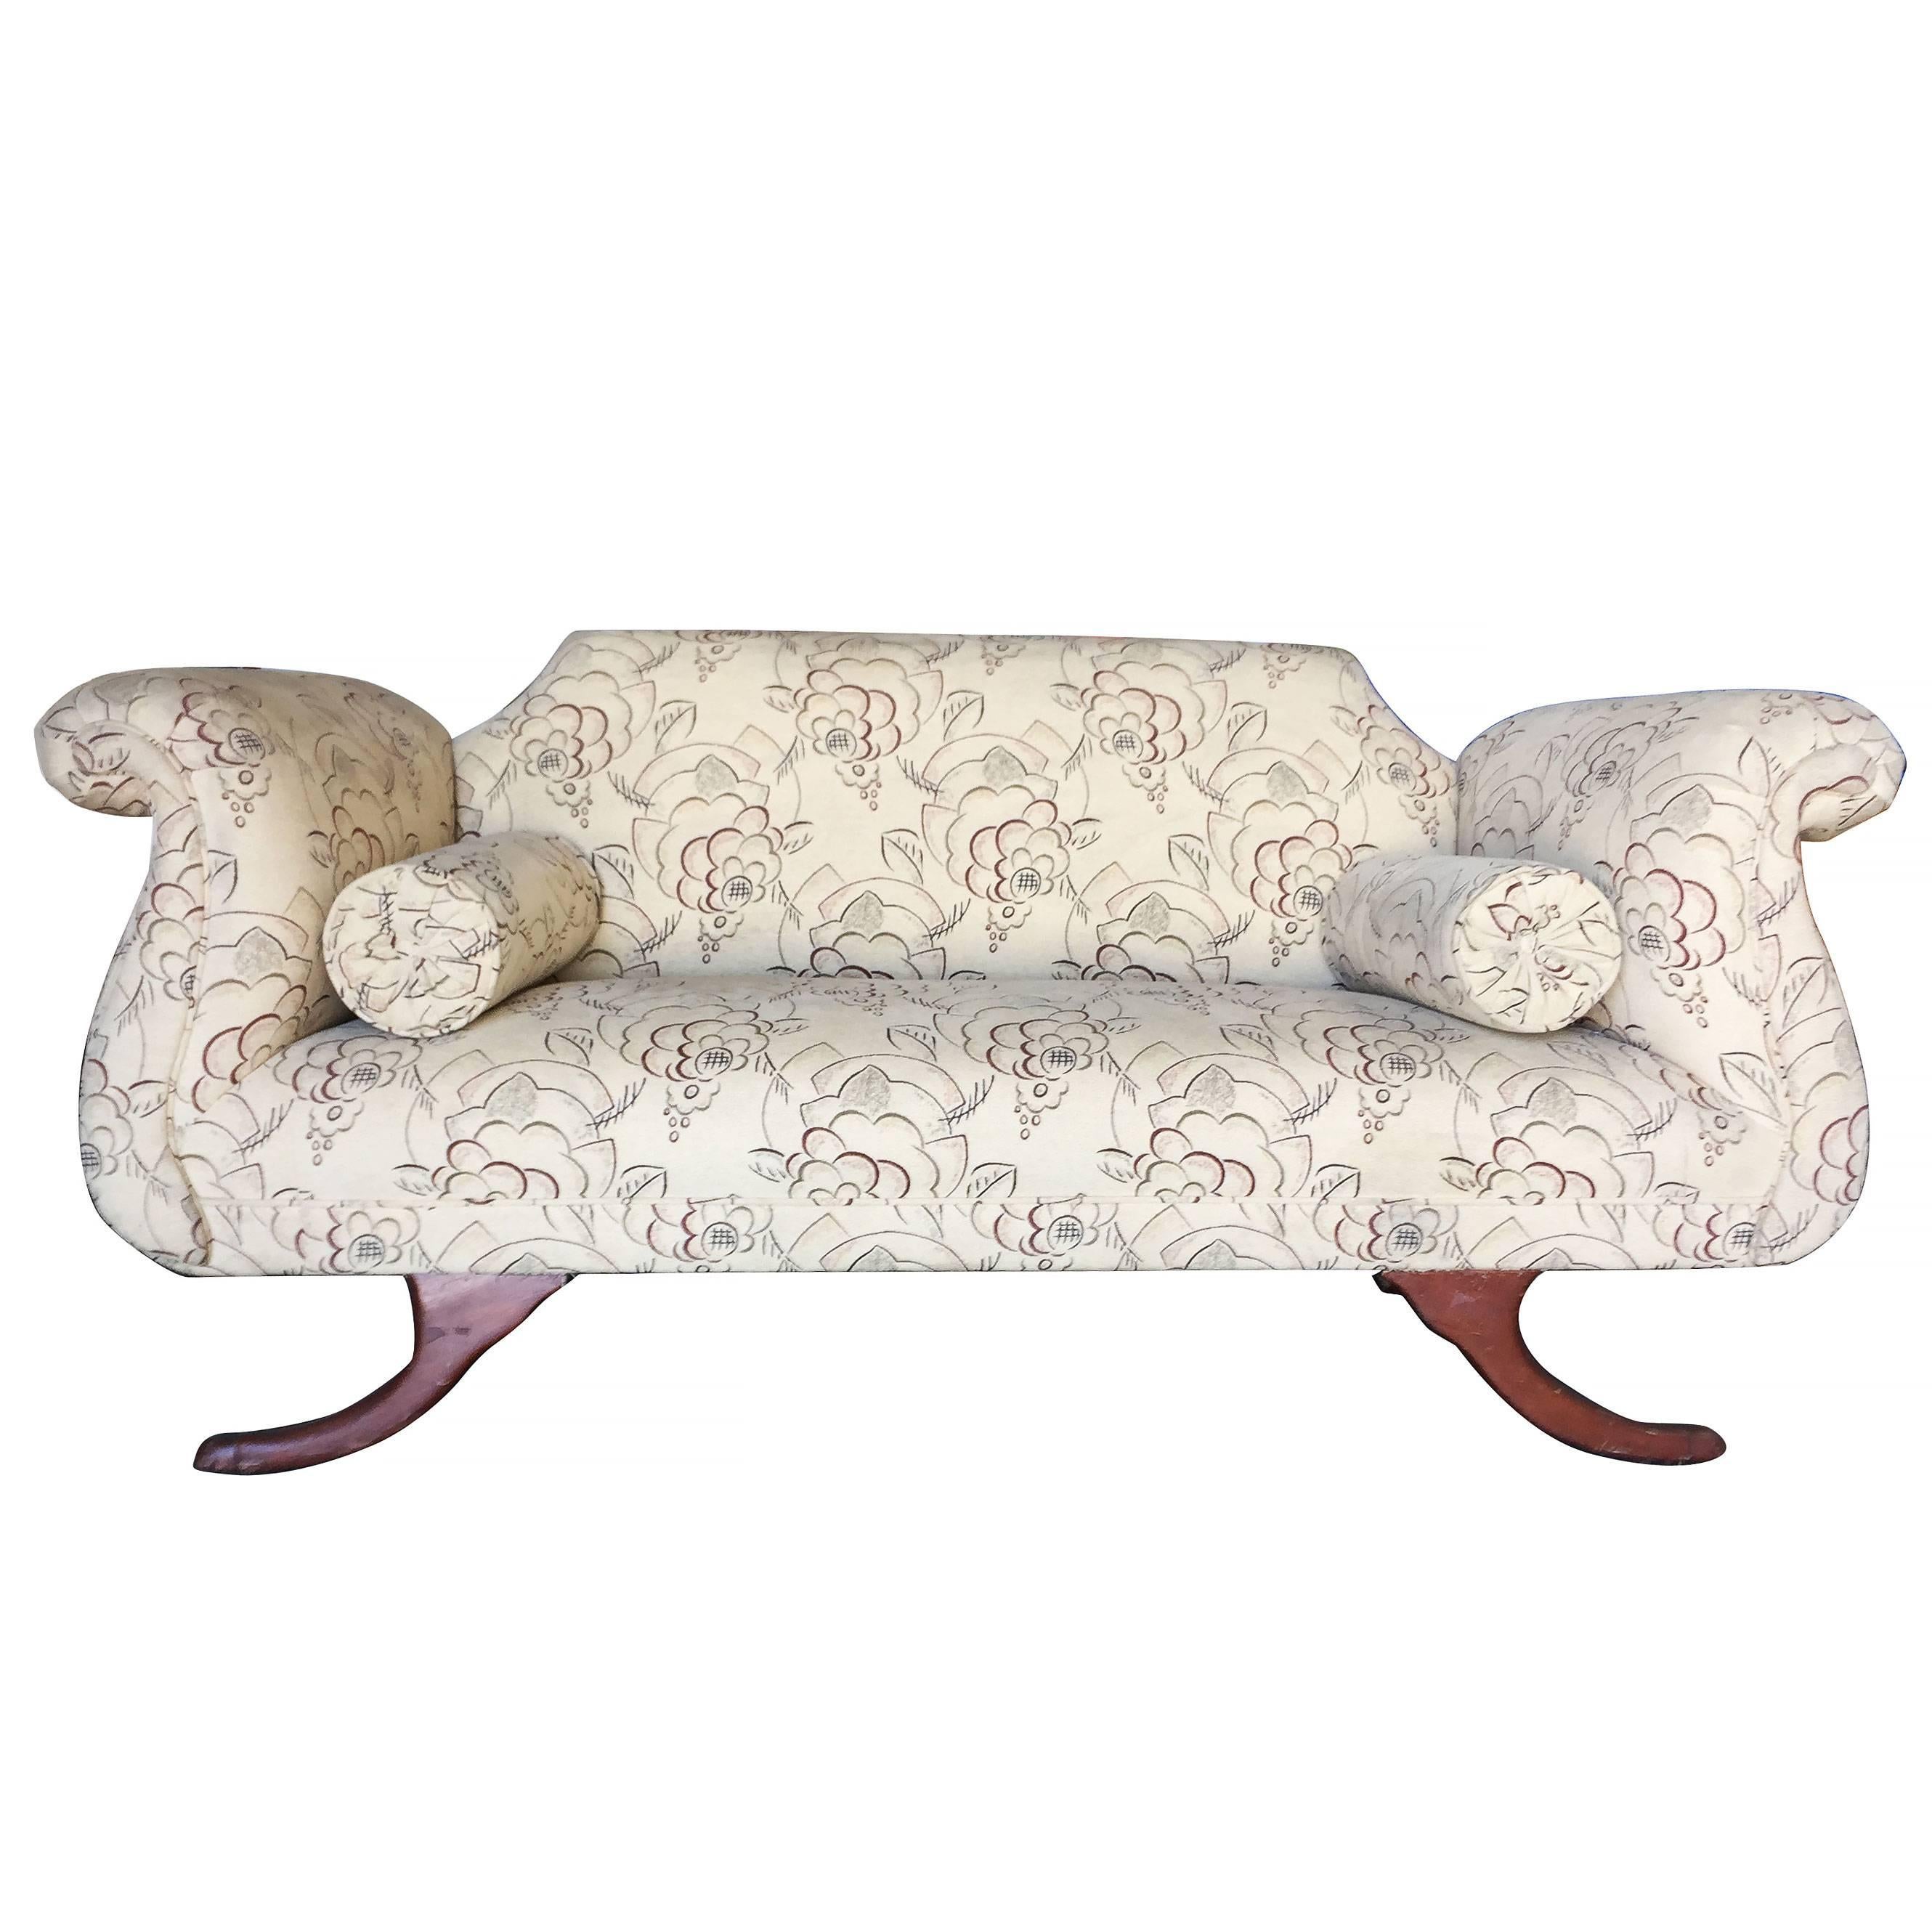 Duncan Phyfe style loveseat settee with scrolling arms, floral print upholstery and matching side pillows.